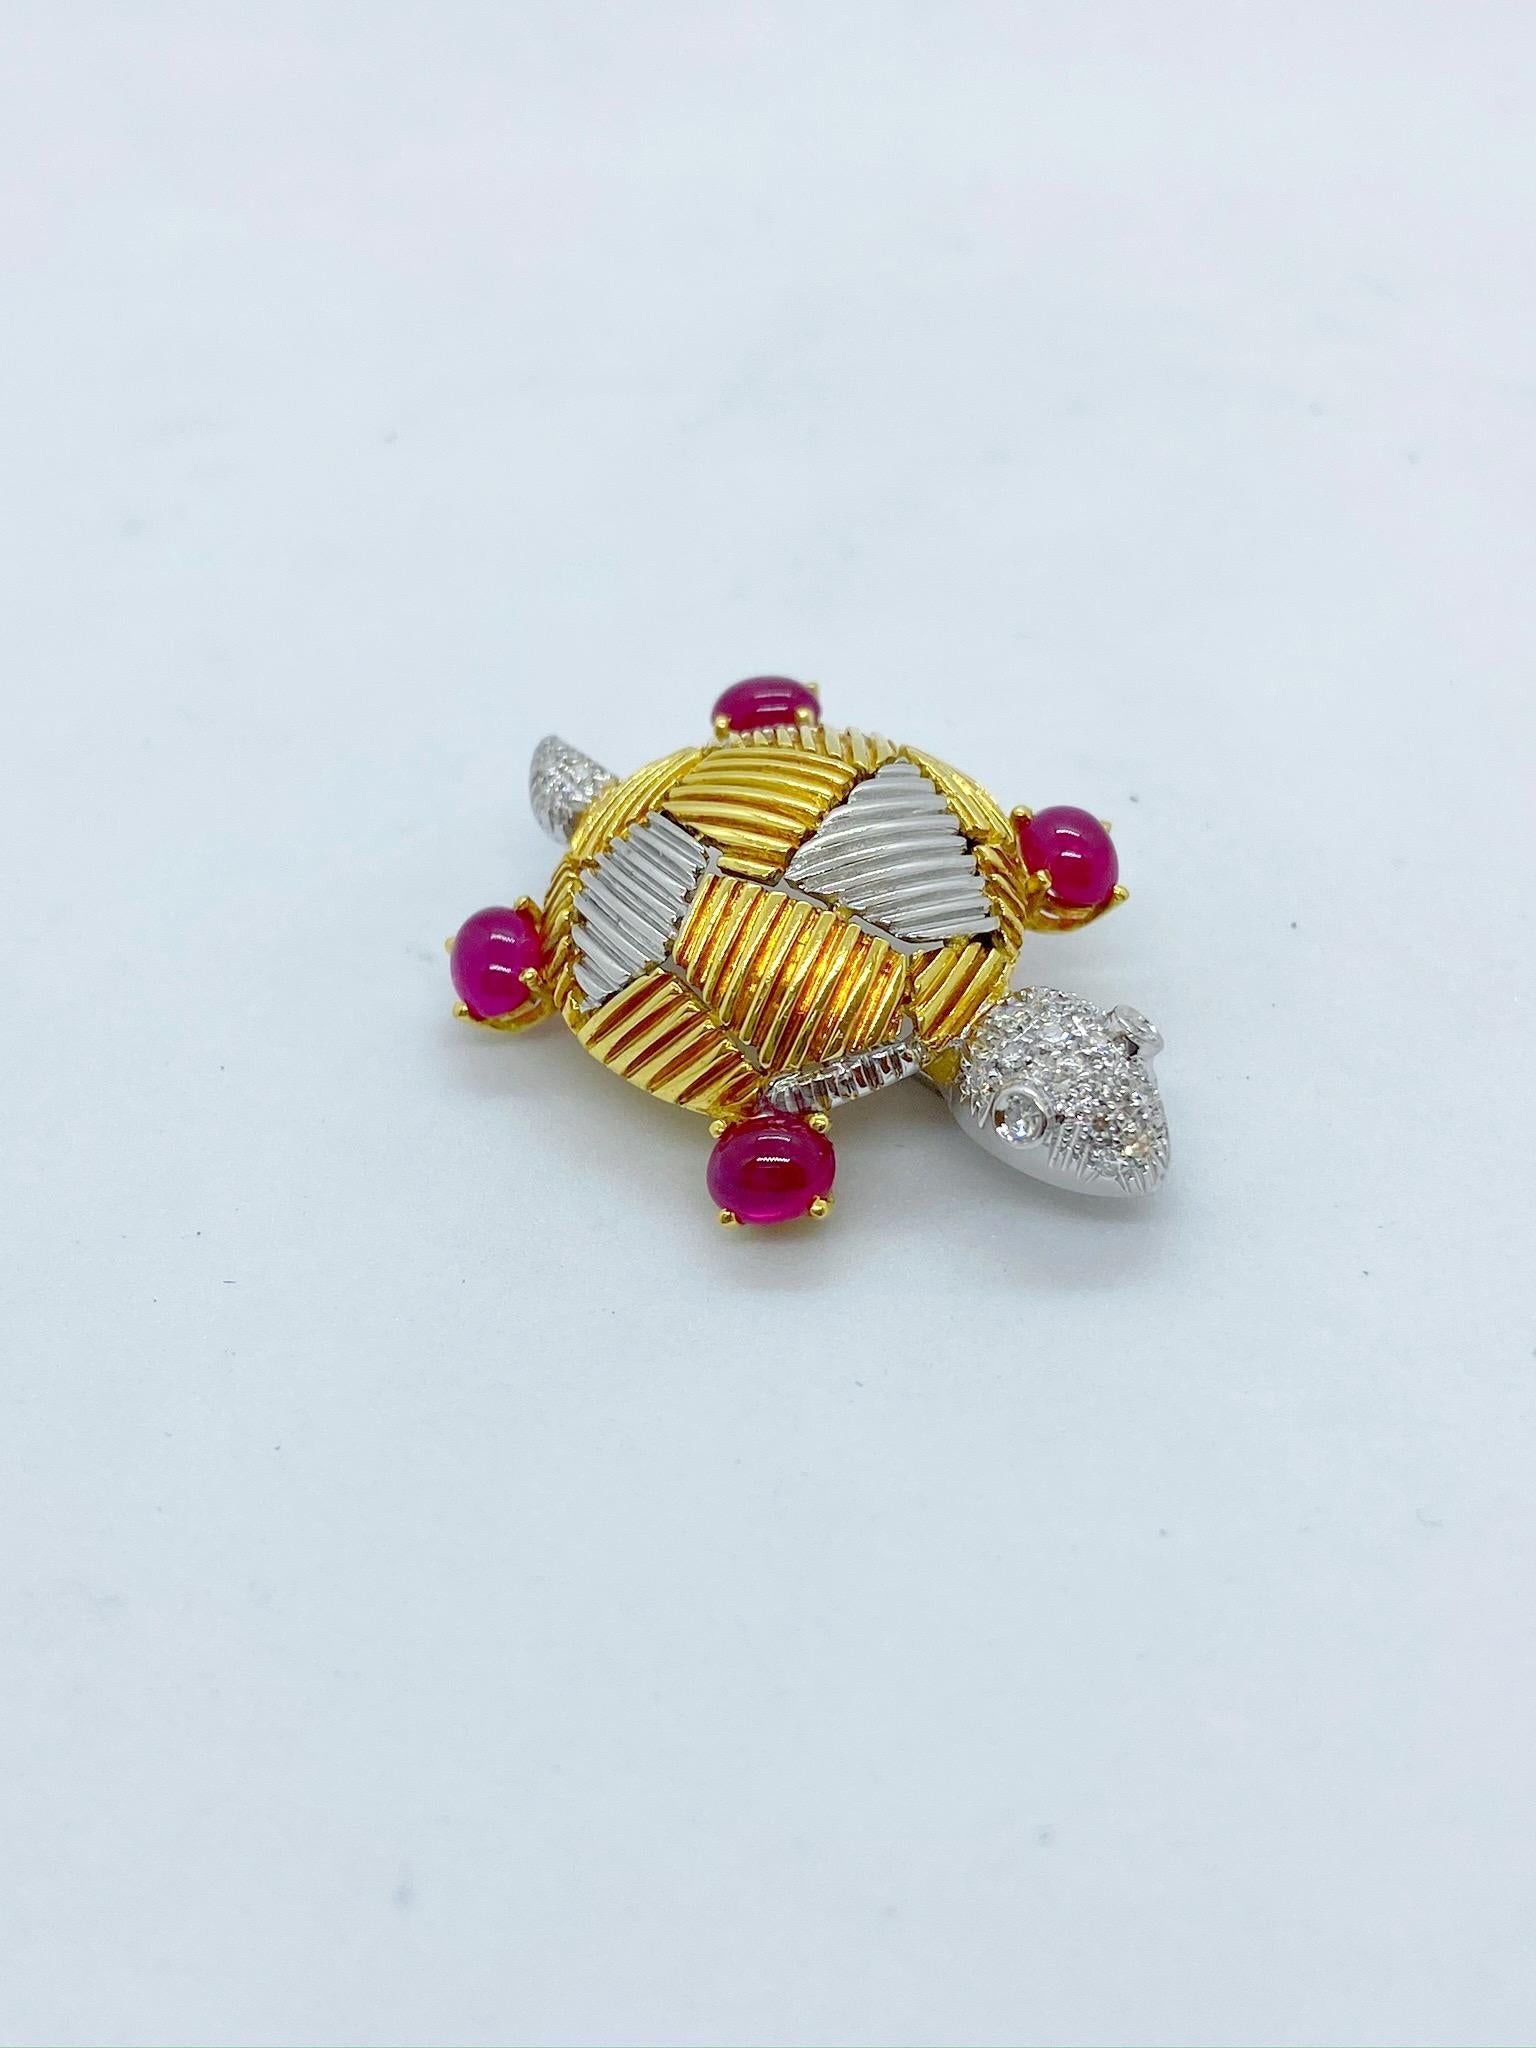 Adorable turtle brooch designed with a geometric pattern in 18 karat white and yellow gold. The turtles head and tail are pave set Diamonds and his four feet are set with round cabochon Rubies. He measures 1 1/4